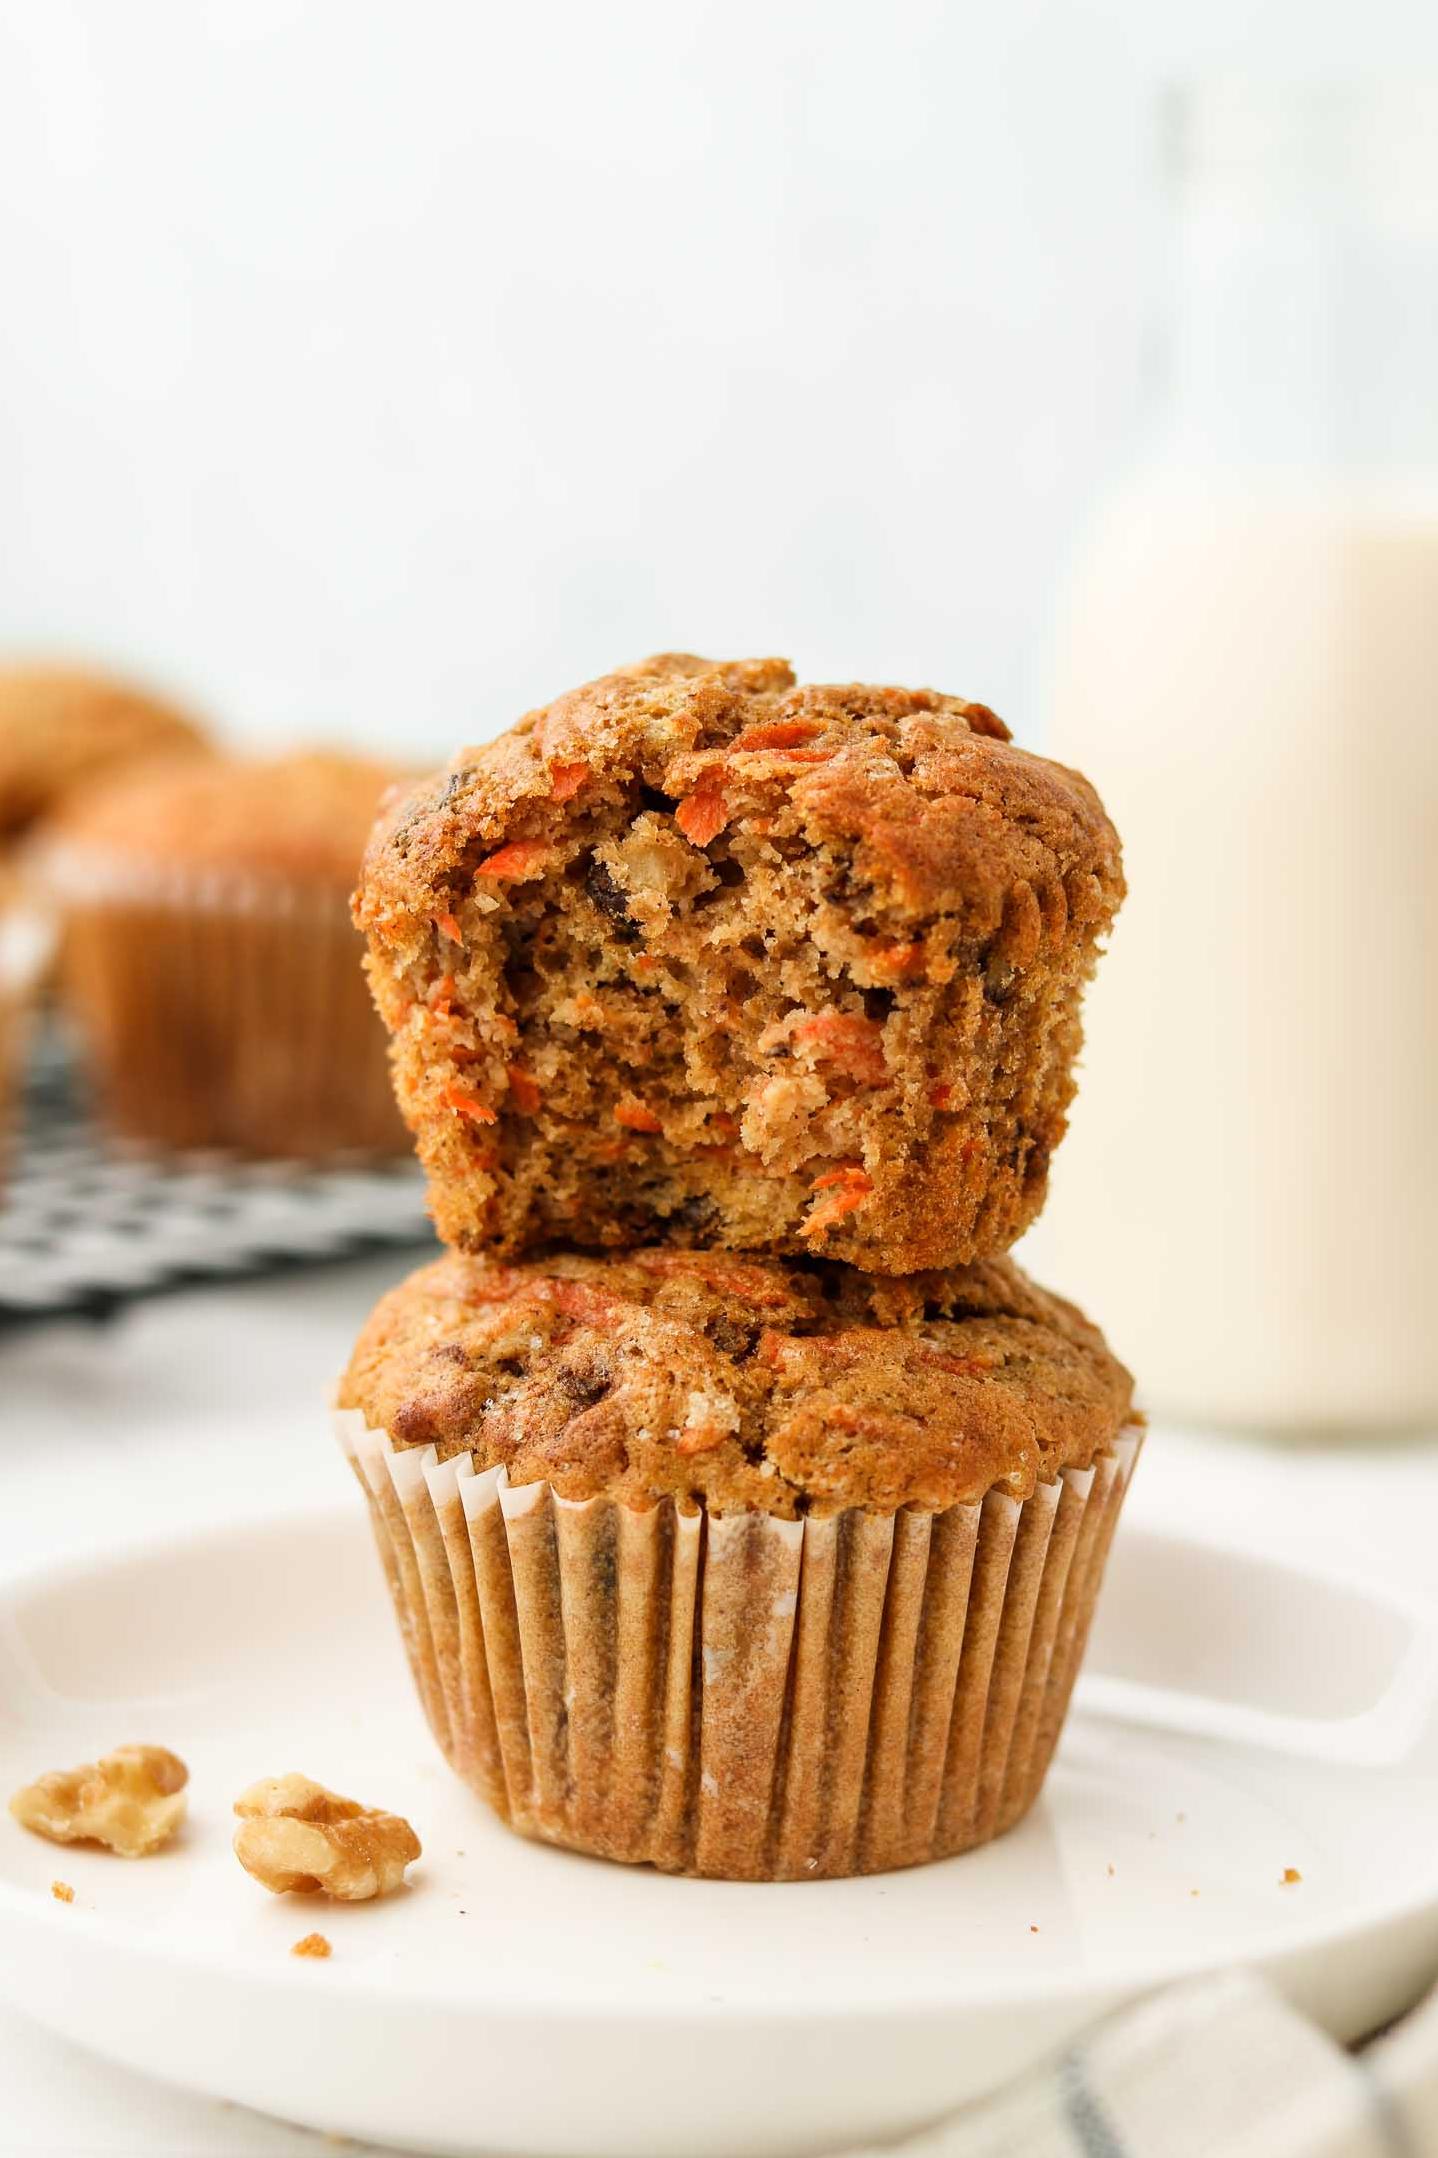  A delicious carrot muffin that is free from gluten, dairy, egg, and yeast is hard to come by, but not anymore!